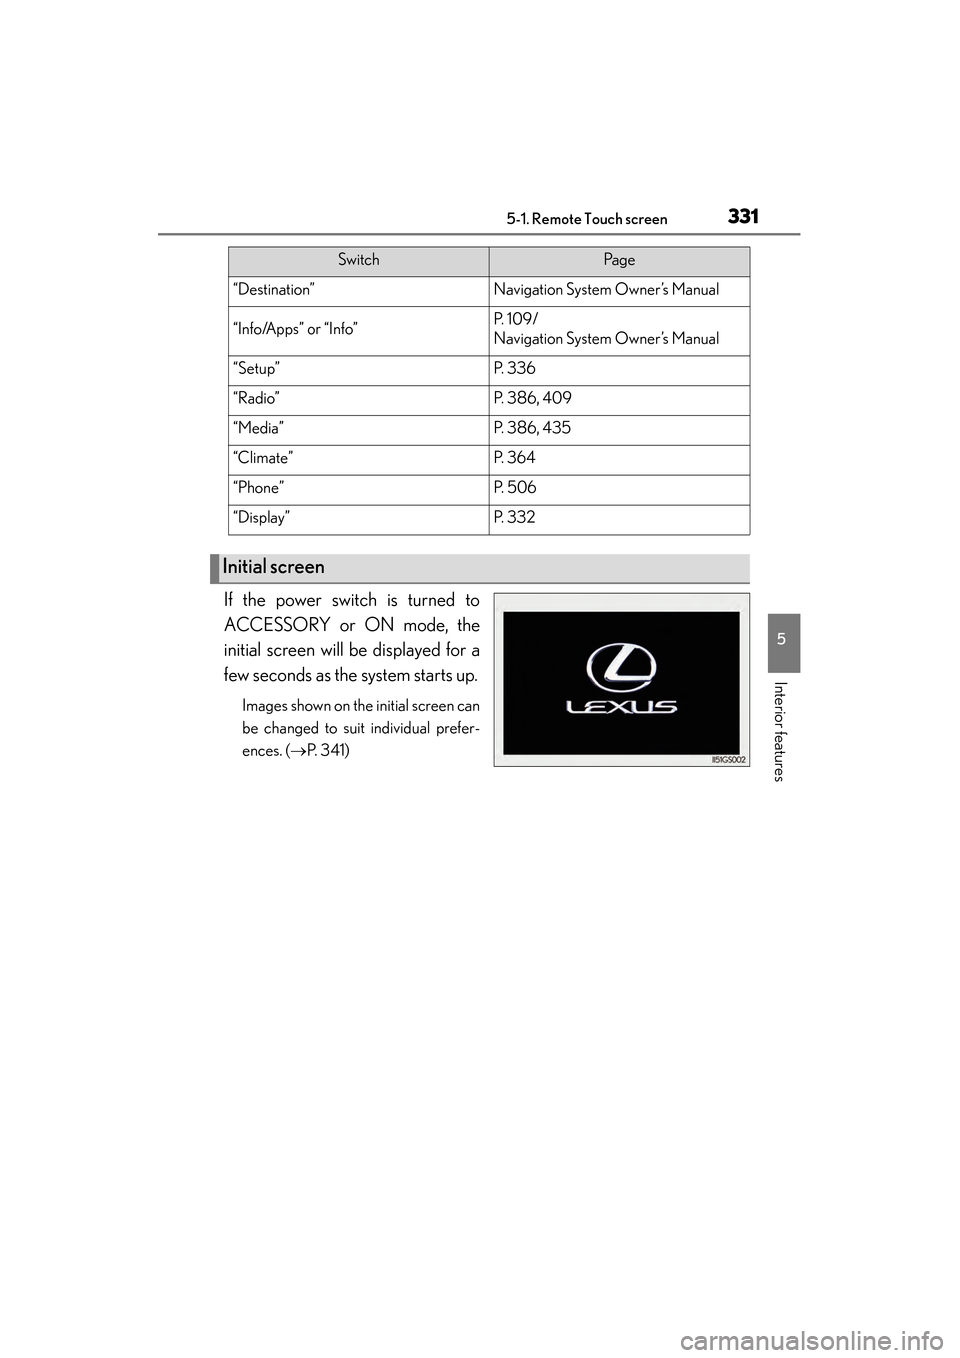 Lexus GS450h 2013  Owners Manual GS450h_U (OM30D01U)
3315-1. Remote Touch screen
5
Interior features
If the power switch is turned to
ACCESSORY or ON mode, the
initial screen will be displayed for a
few seconds as the system starts u